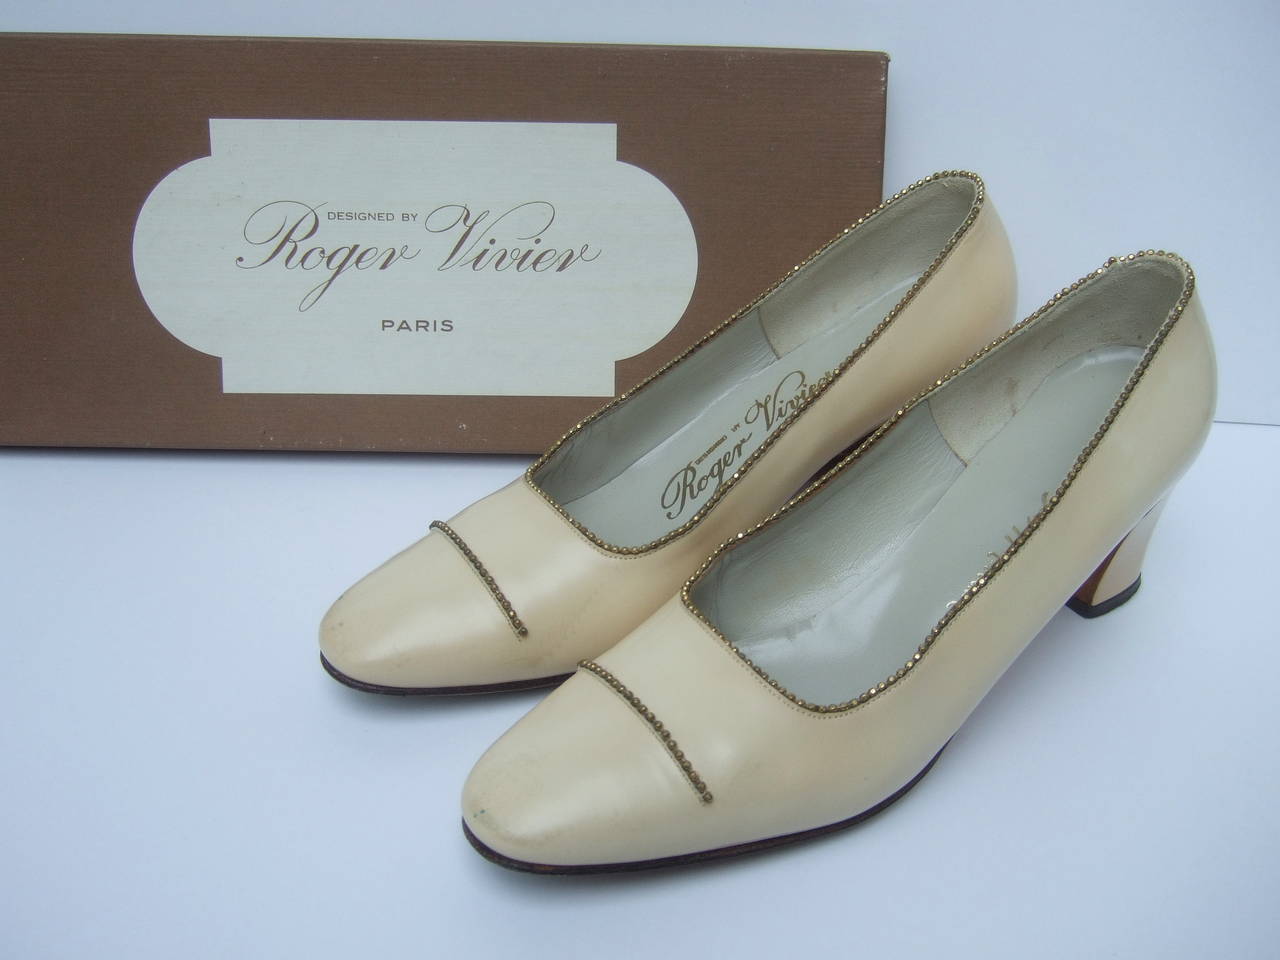 Roger Vivier Paris Ivory leather beaded pumps for Saks Fifth Avenue c 1970
The elegant retro pumps are embellished with restrained gold hematite glass beaded trim. The classic designer pumps are covered with ivory color leather
The stylish retro